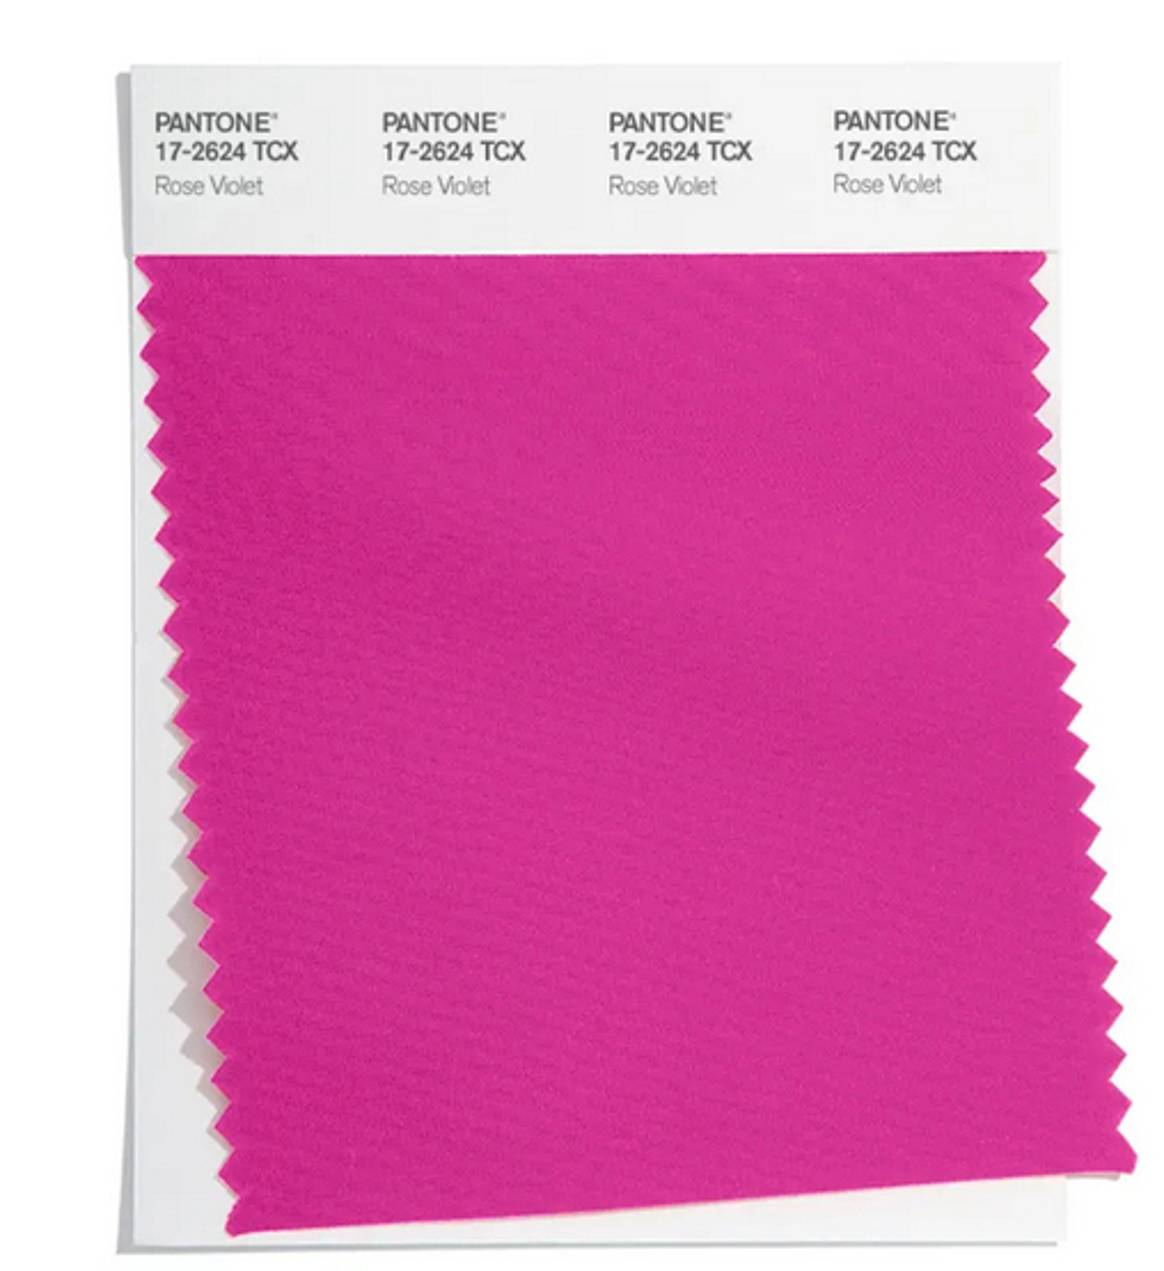 Bright pink is also part of Pantone's NYFW FW22 color trend report. Image: Pantone Colour: 17-2624 Rose Violet, property Pantone